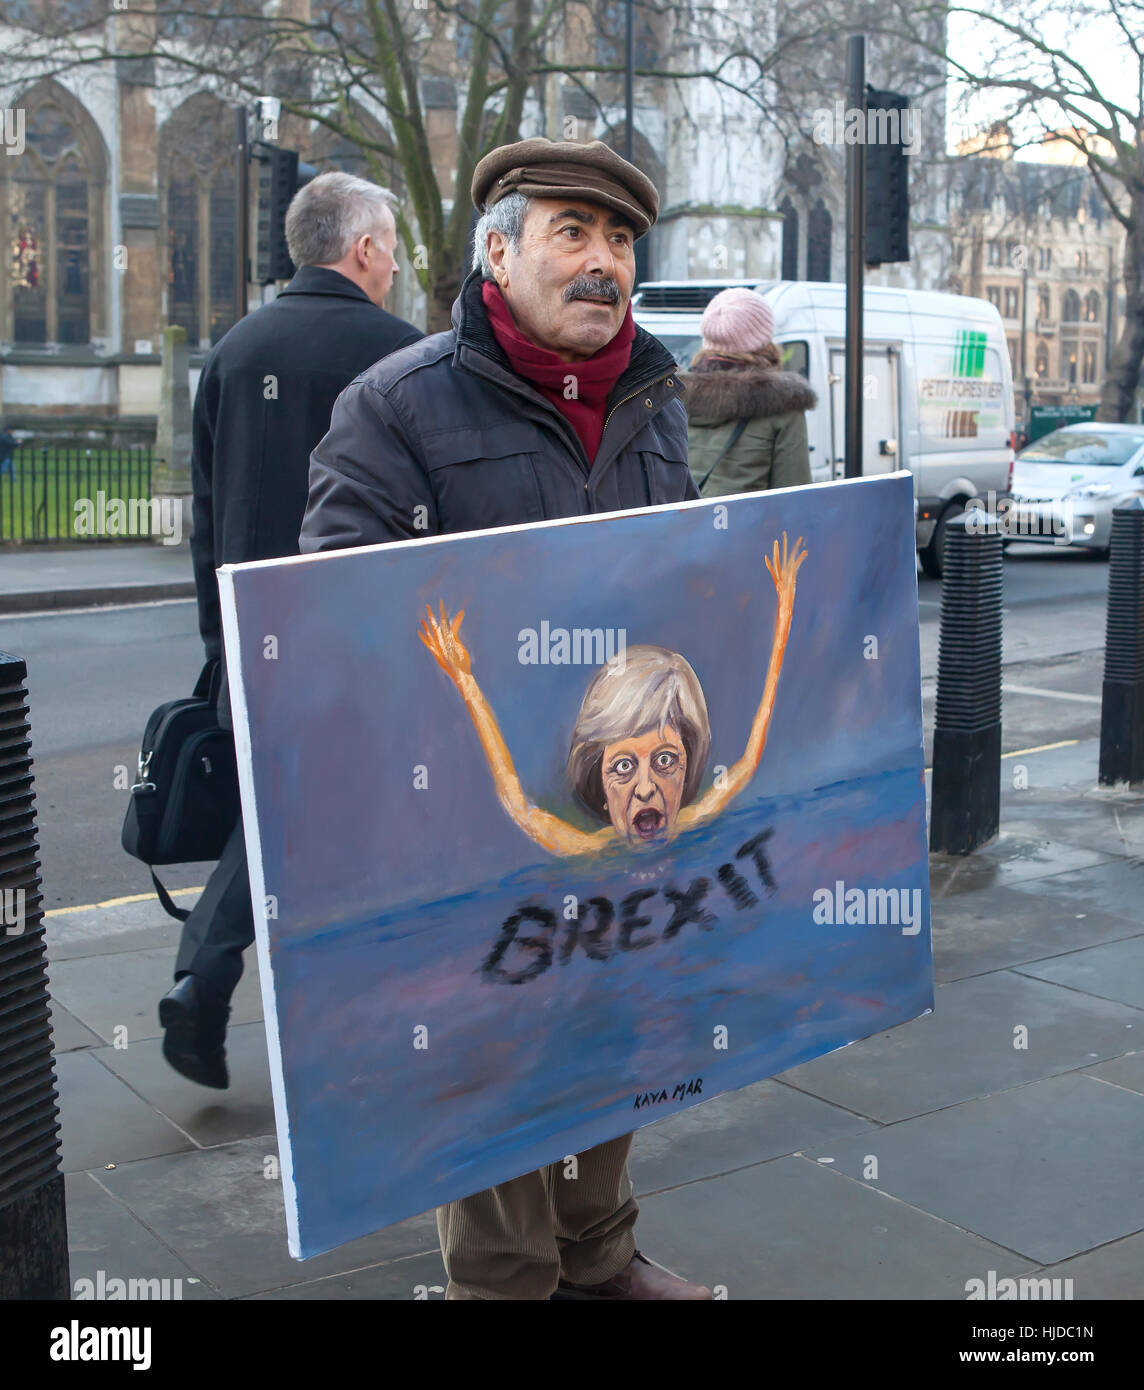 London, UK. 24th Jan, 2017. Verdict of the Supreme Court. The verdict of the Supreme Court was given today. Kaya Mar, artist, is reknown for painting his objection to Brexit. Credit: Jane Campbell/Alamy Live News Stock Photo